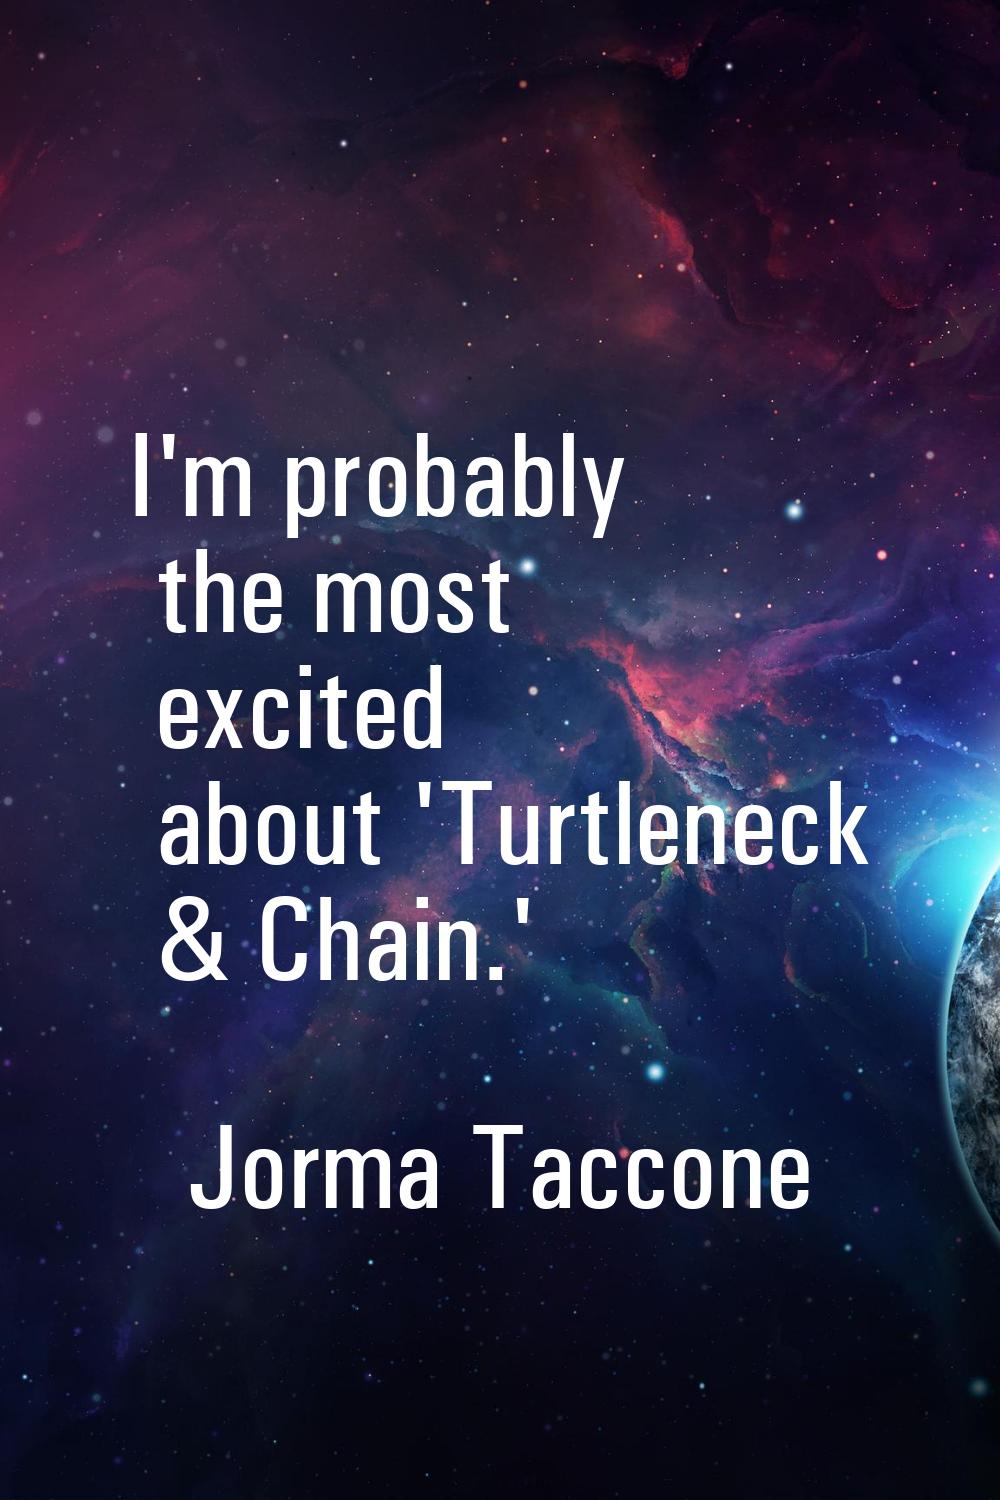 I'm probably the most excited about 'Turtleneck & Chain.'